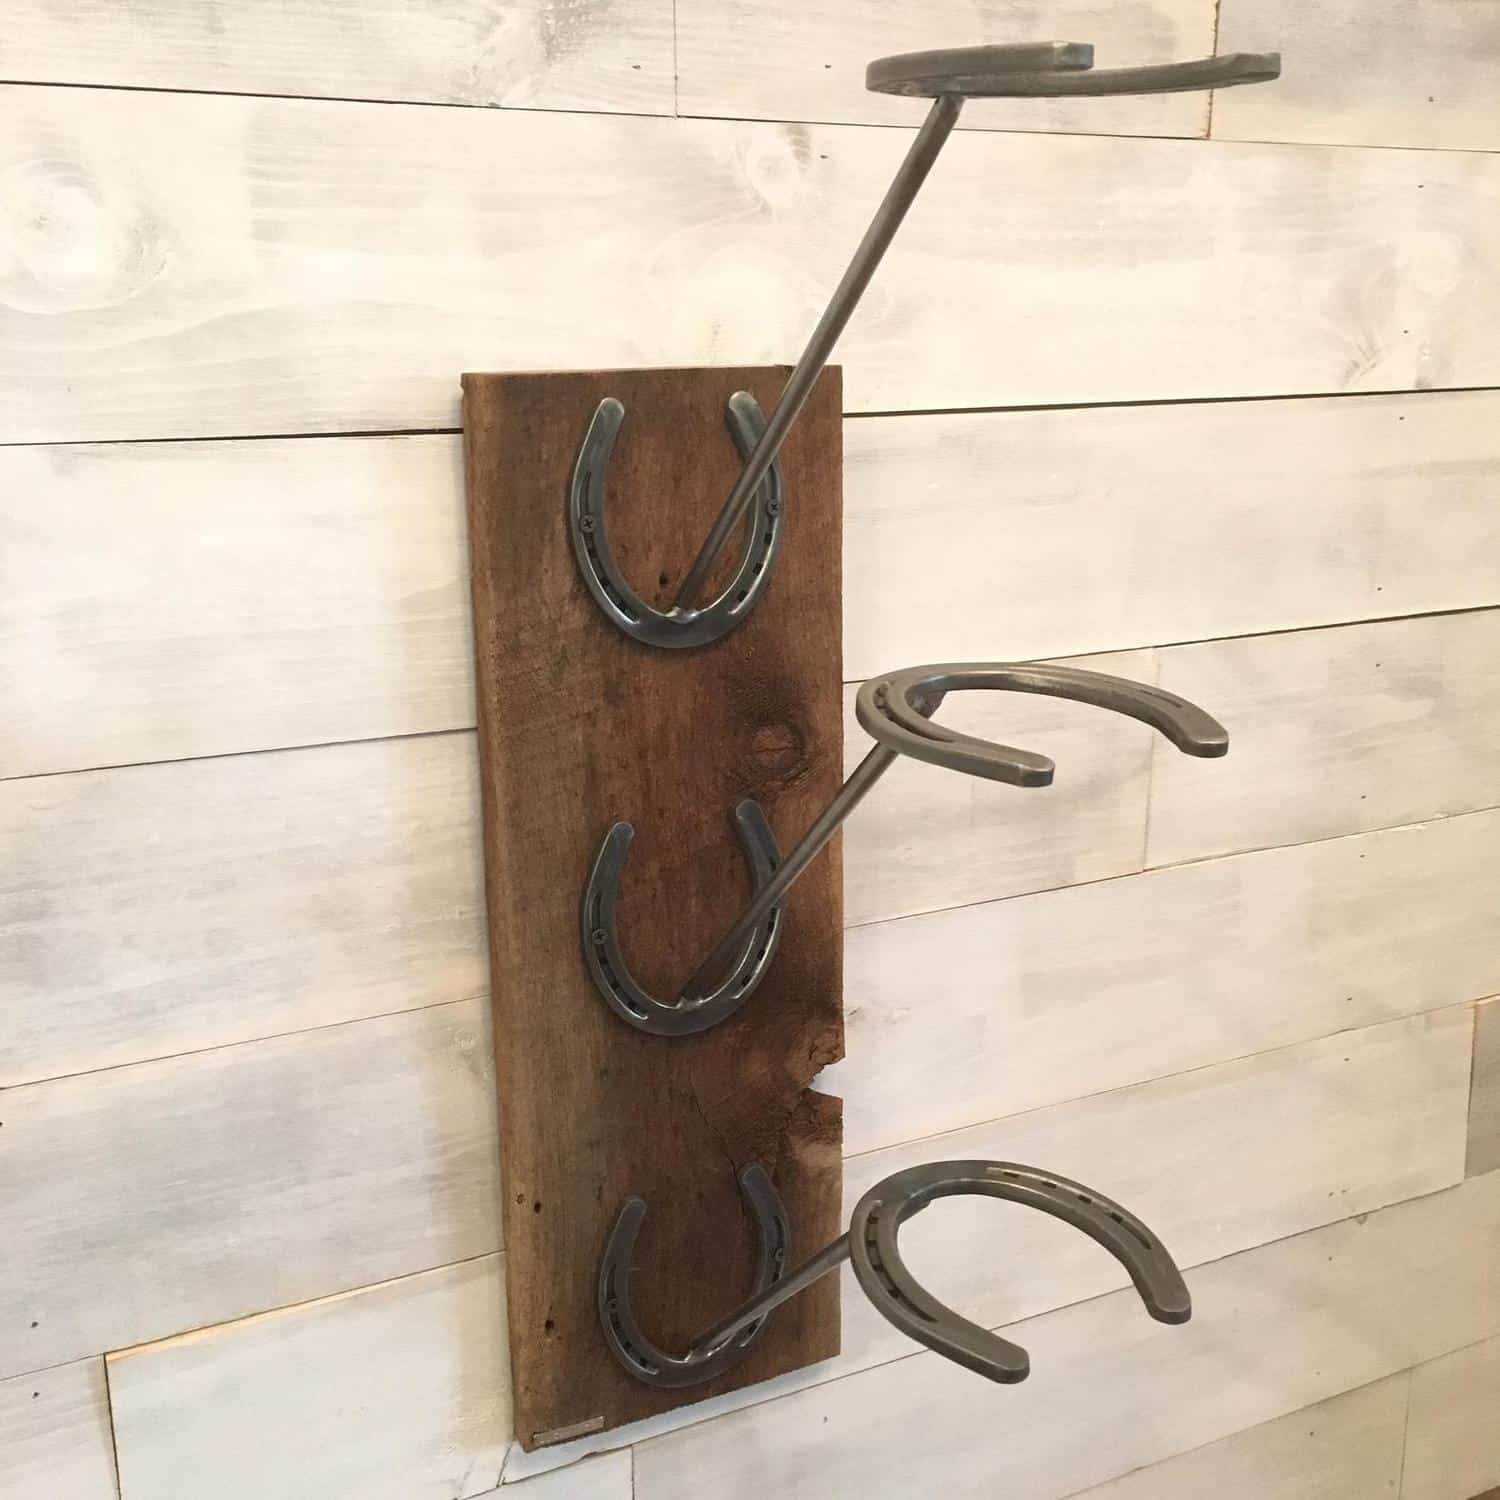 Cowboy-style Rack with Horse Shoes